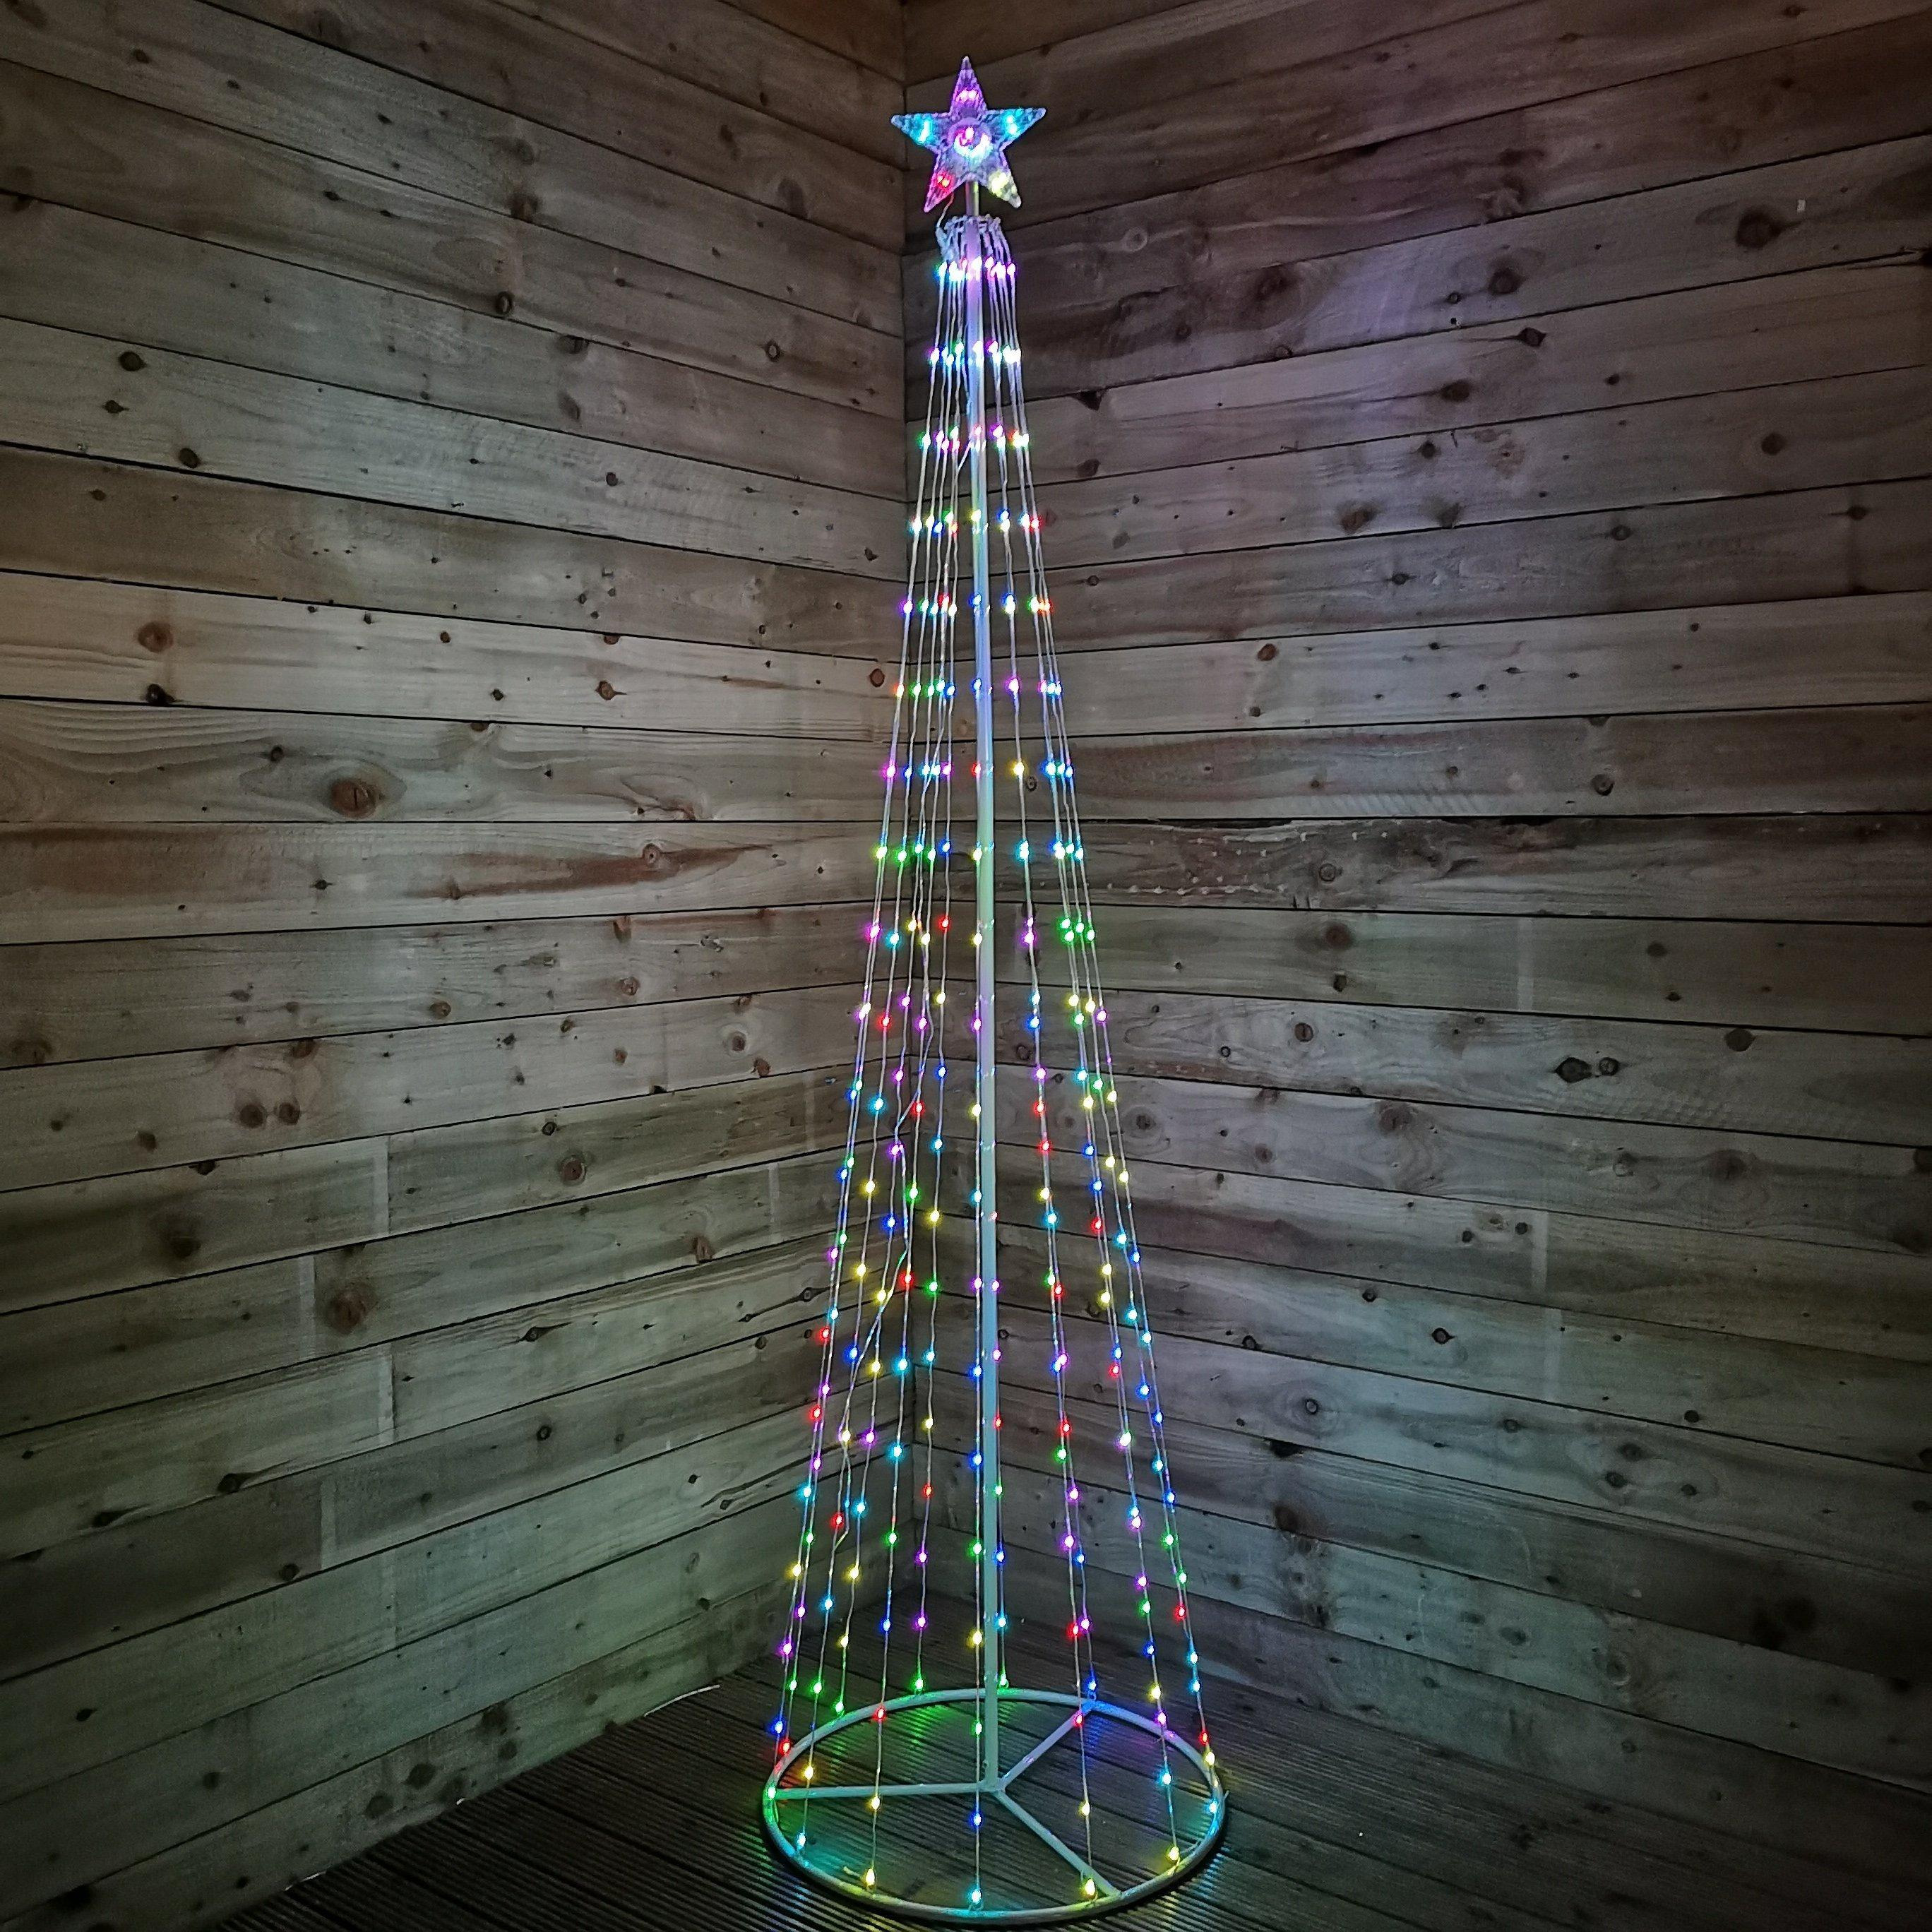 8ft (2.5m) LED Maypole Christmas Tree with Remote Control in Red, Green and Blue - image 1